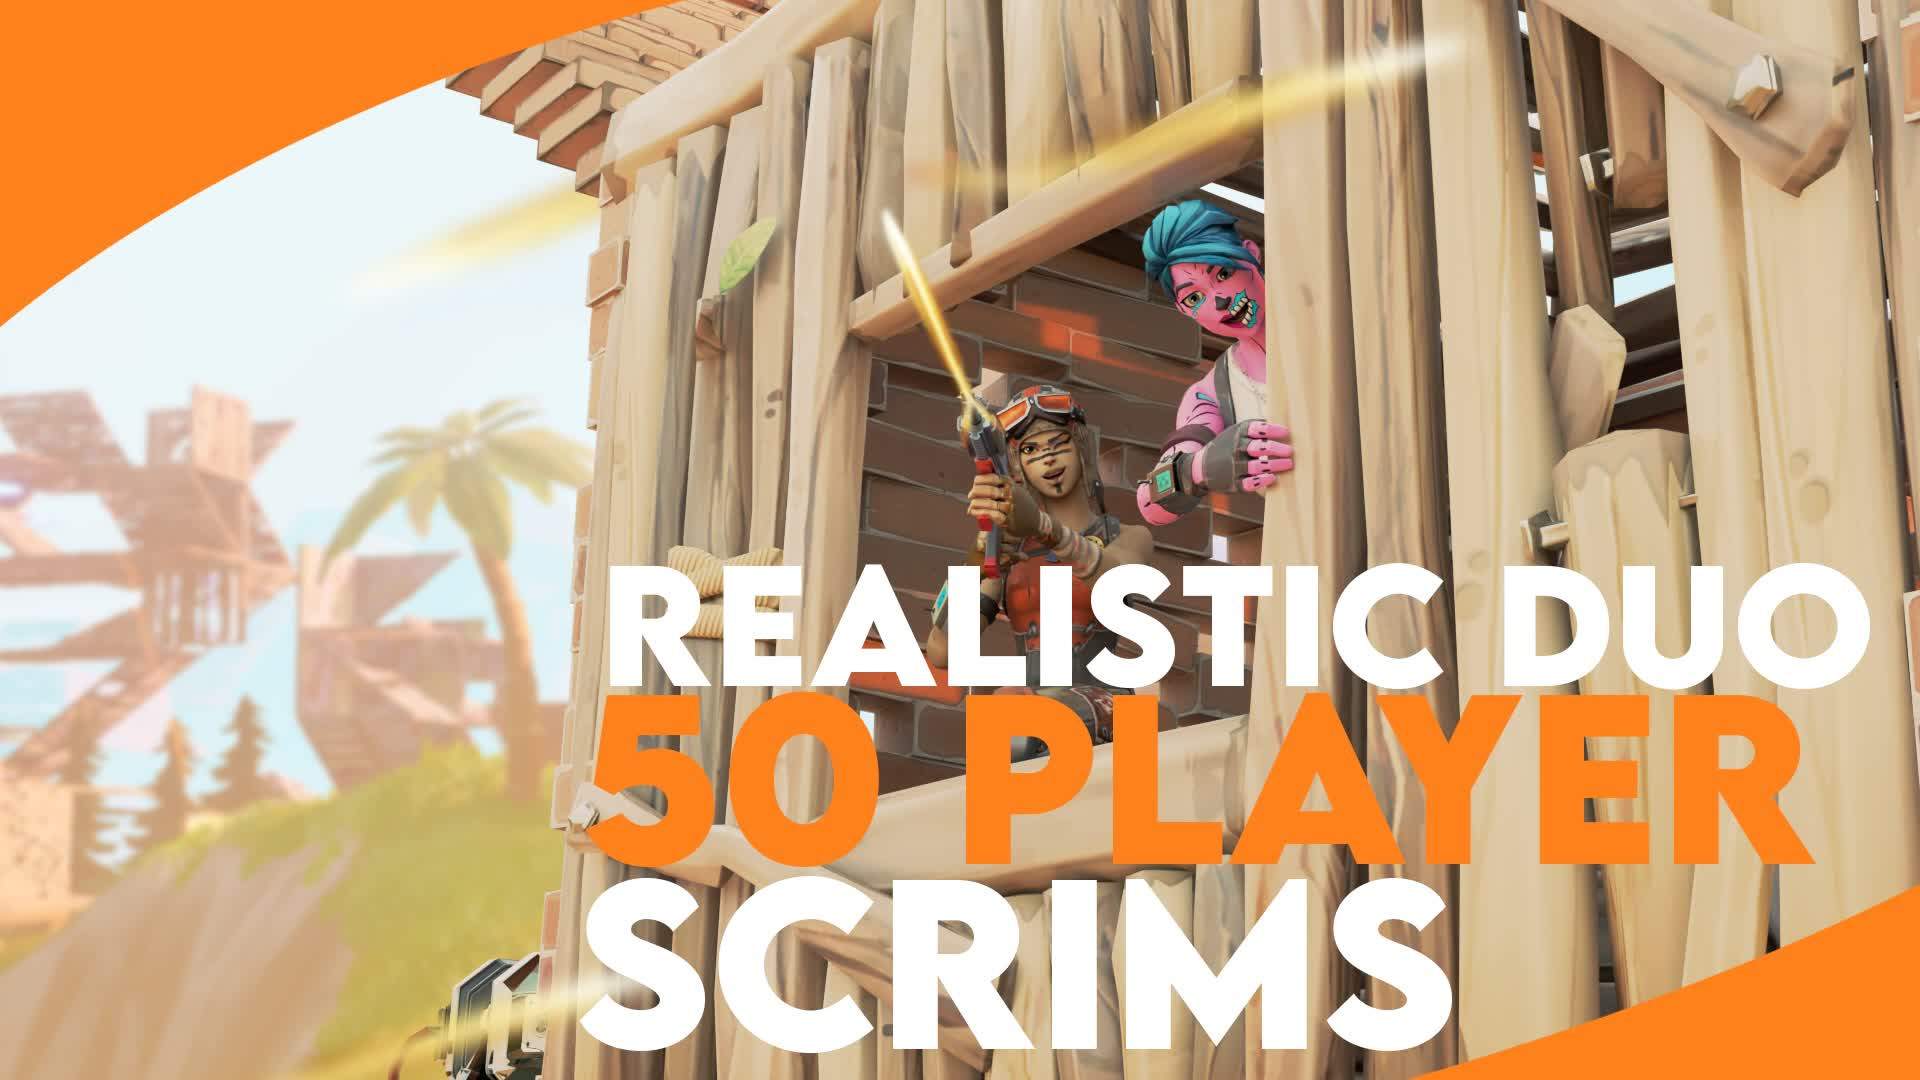 💯REALISTIC DUO |50 PLAYER| SCRIMS💯